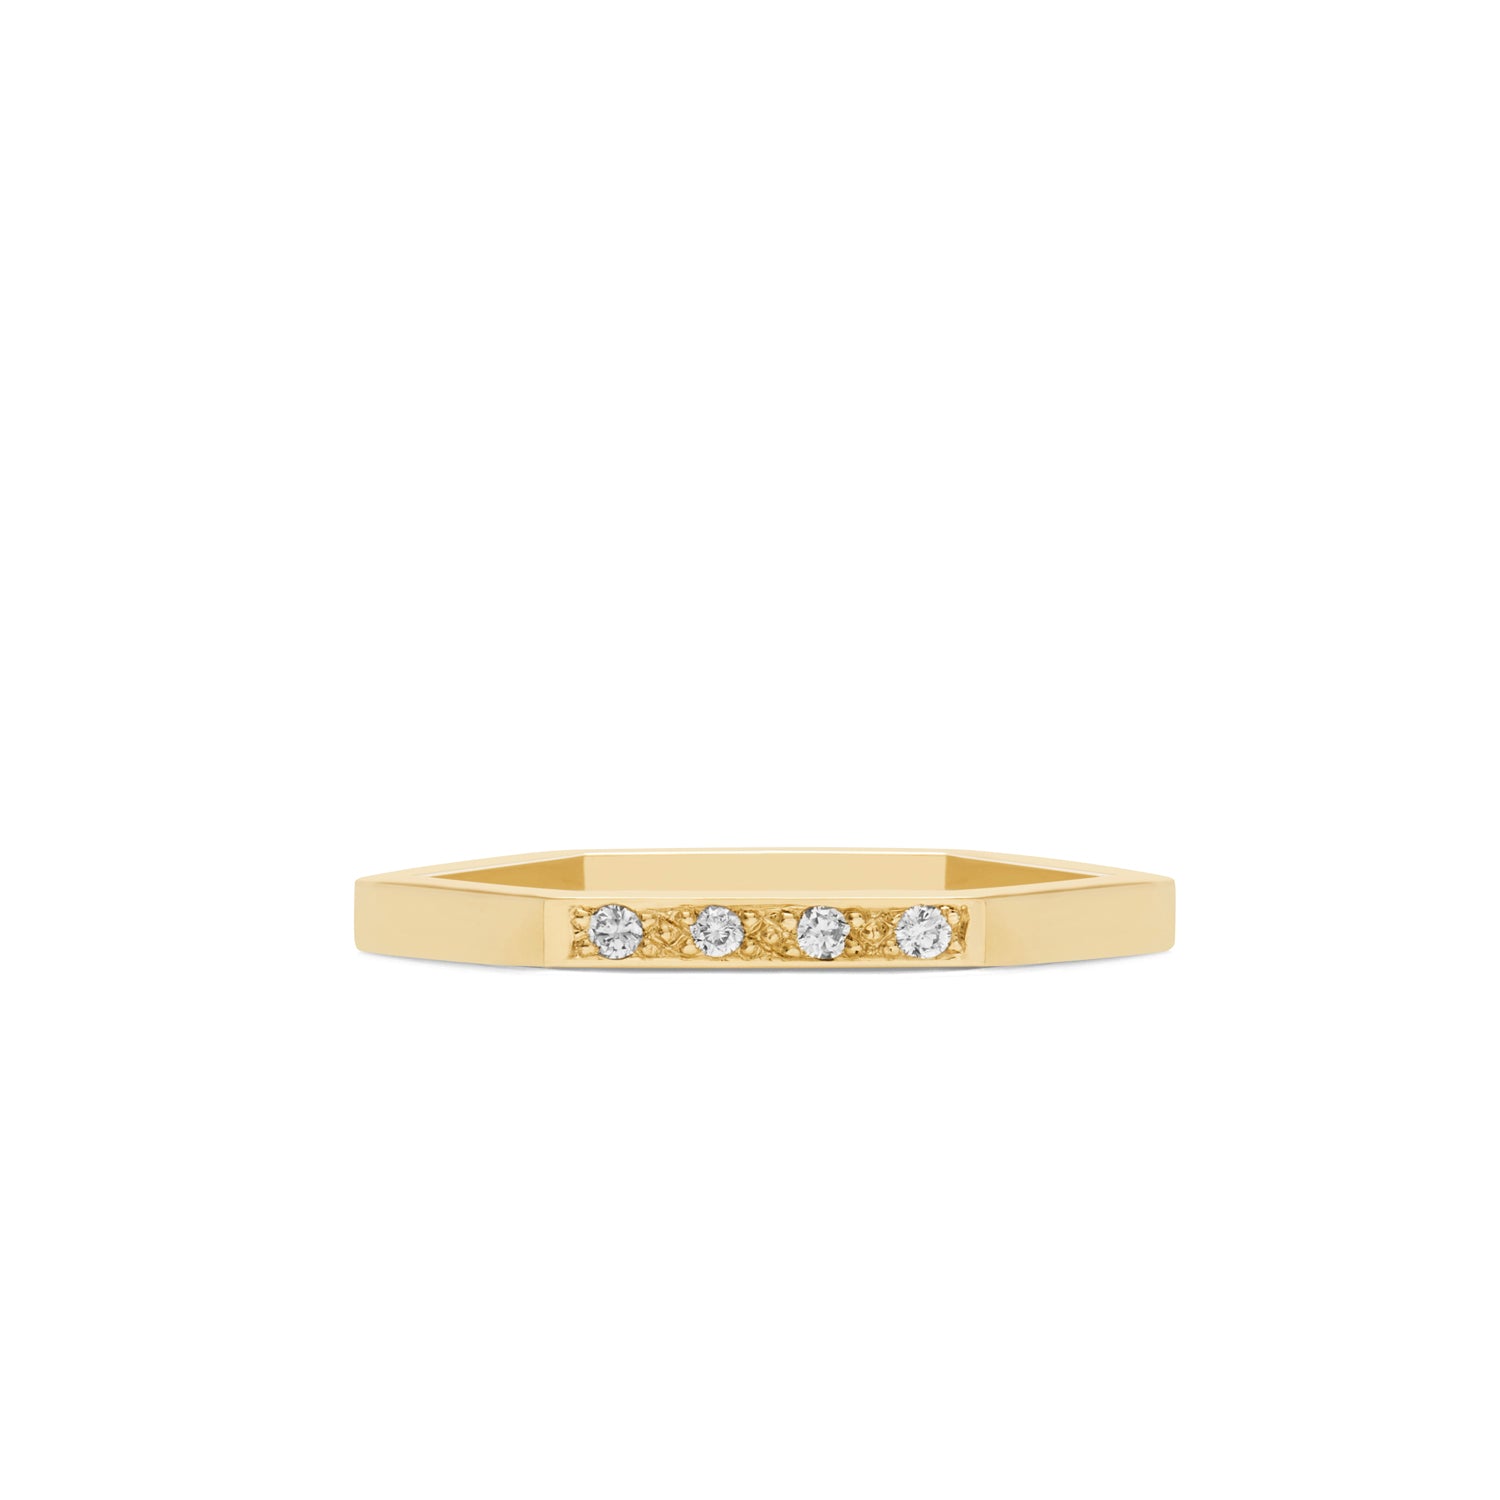 Hexagon Stack of 3 Rings with Diamonds - 9k Yellow Gold